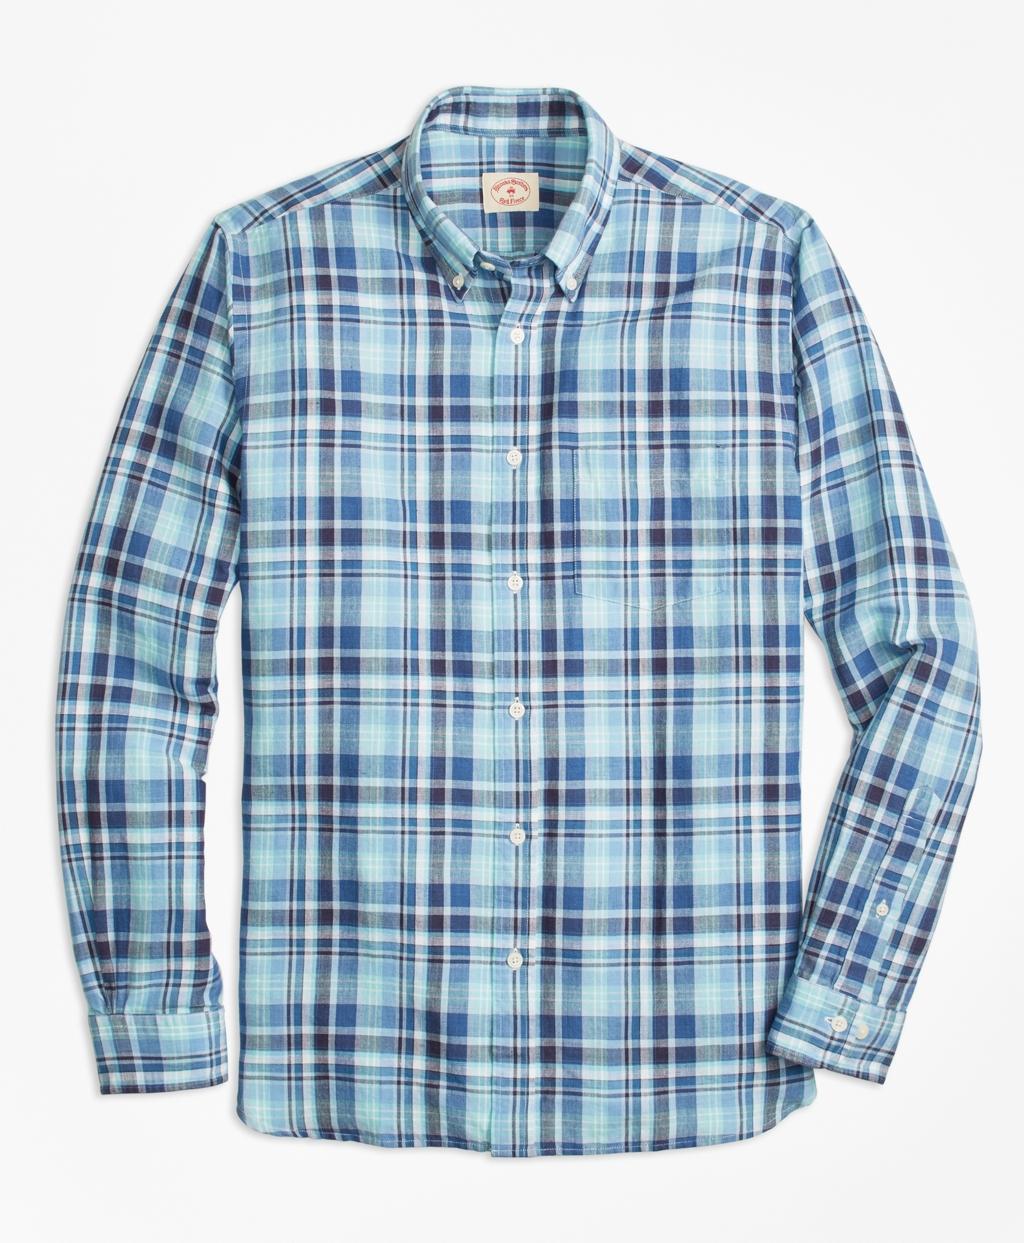 Lyst - Brooks Brothers Plaid Linen-cotton Sport Shirt in Blue for Men